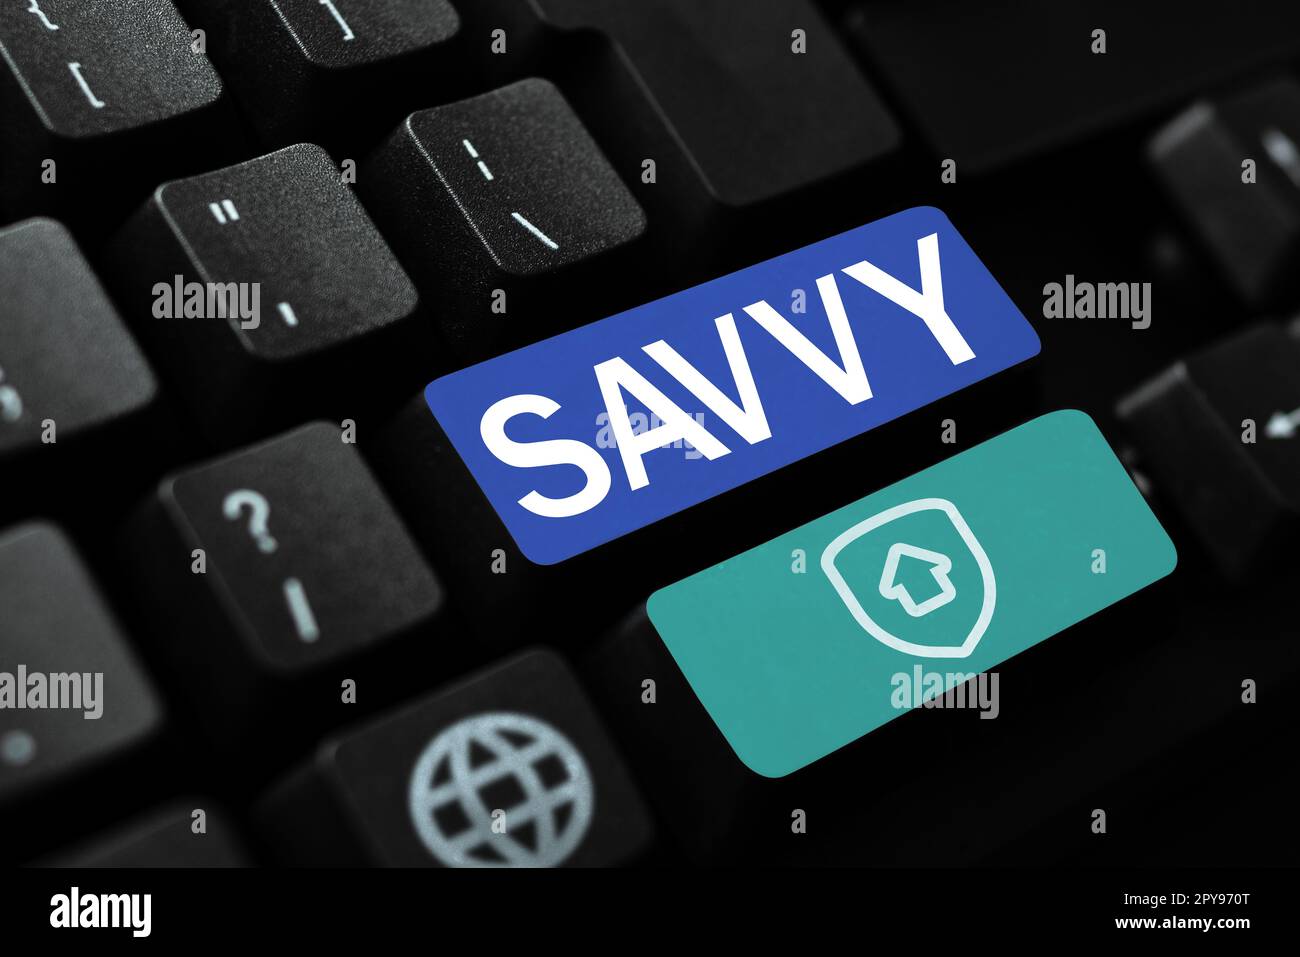 Handwriting text Savvy. Business concept having perception, comprehension in practical matters Stock Photo